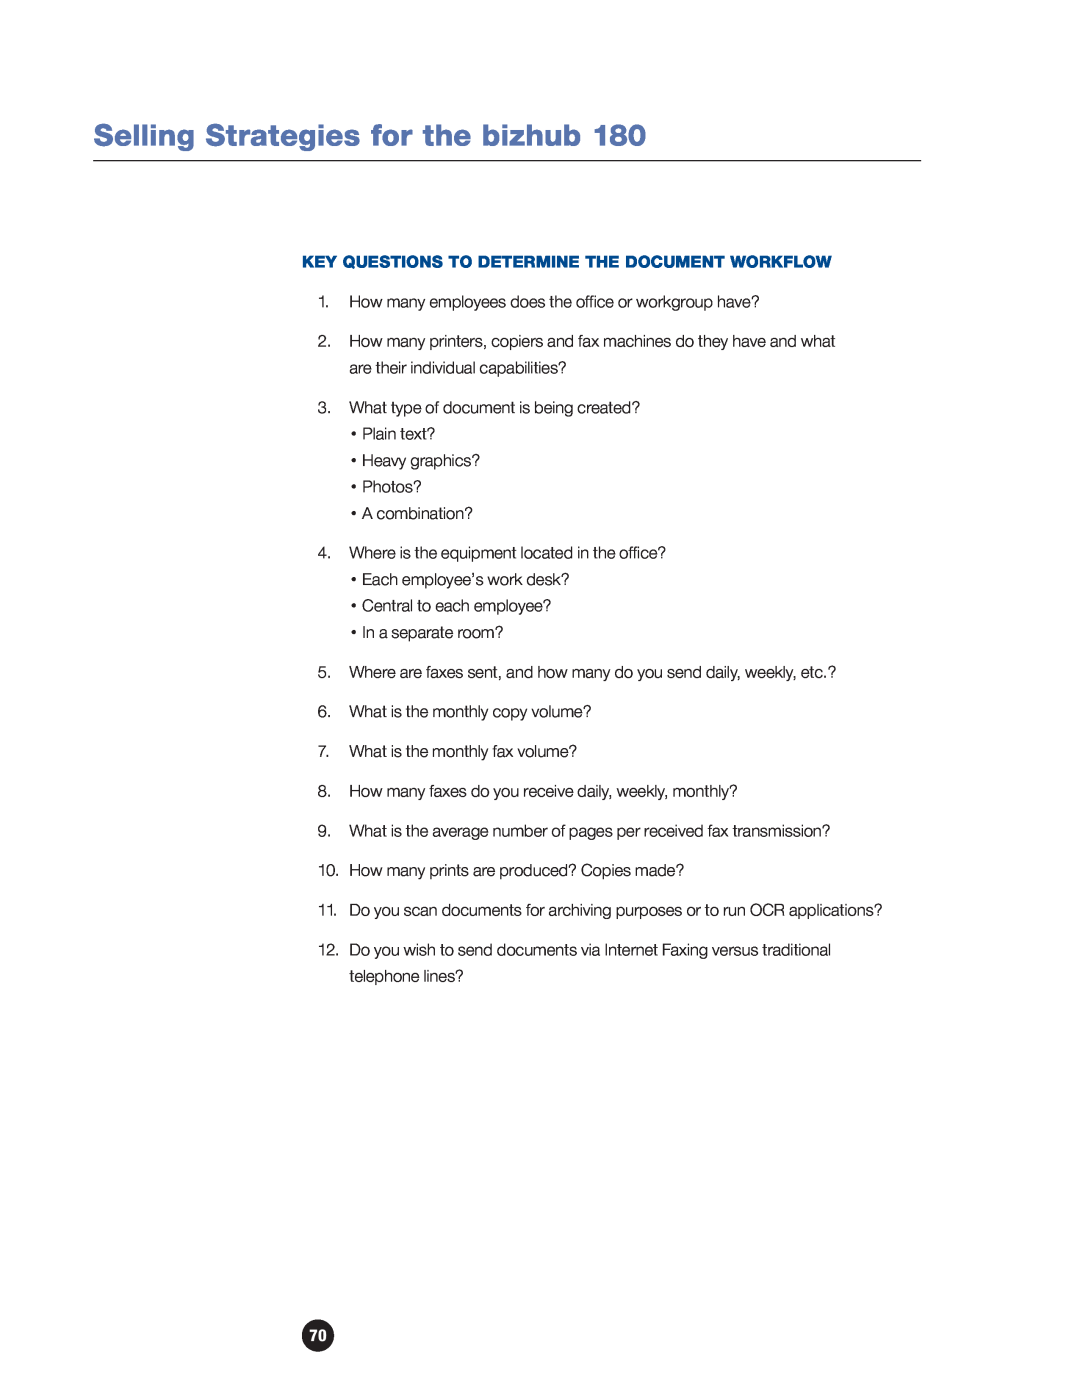 Konica Minolta 180 manual Key Questions To Determine The Document Workflow, Selling Strategies for the bizhub 